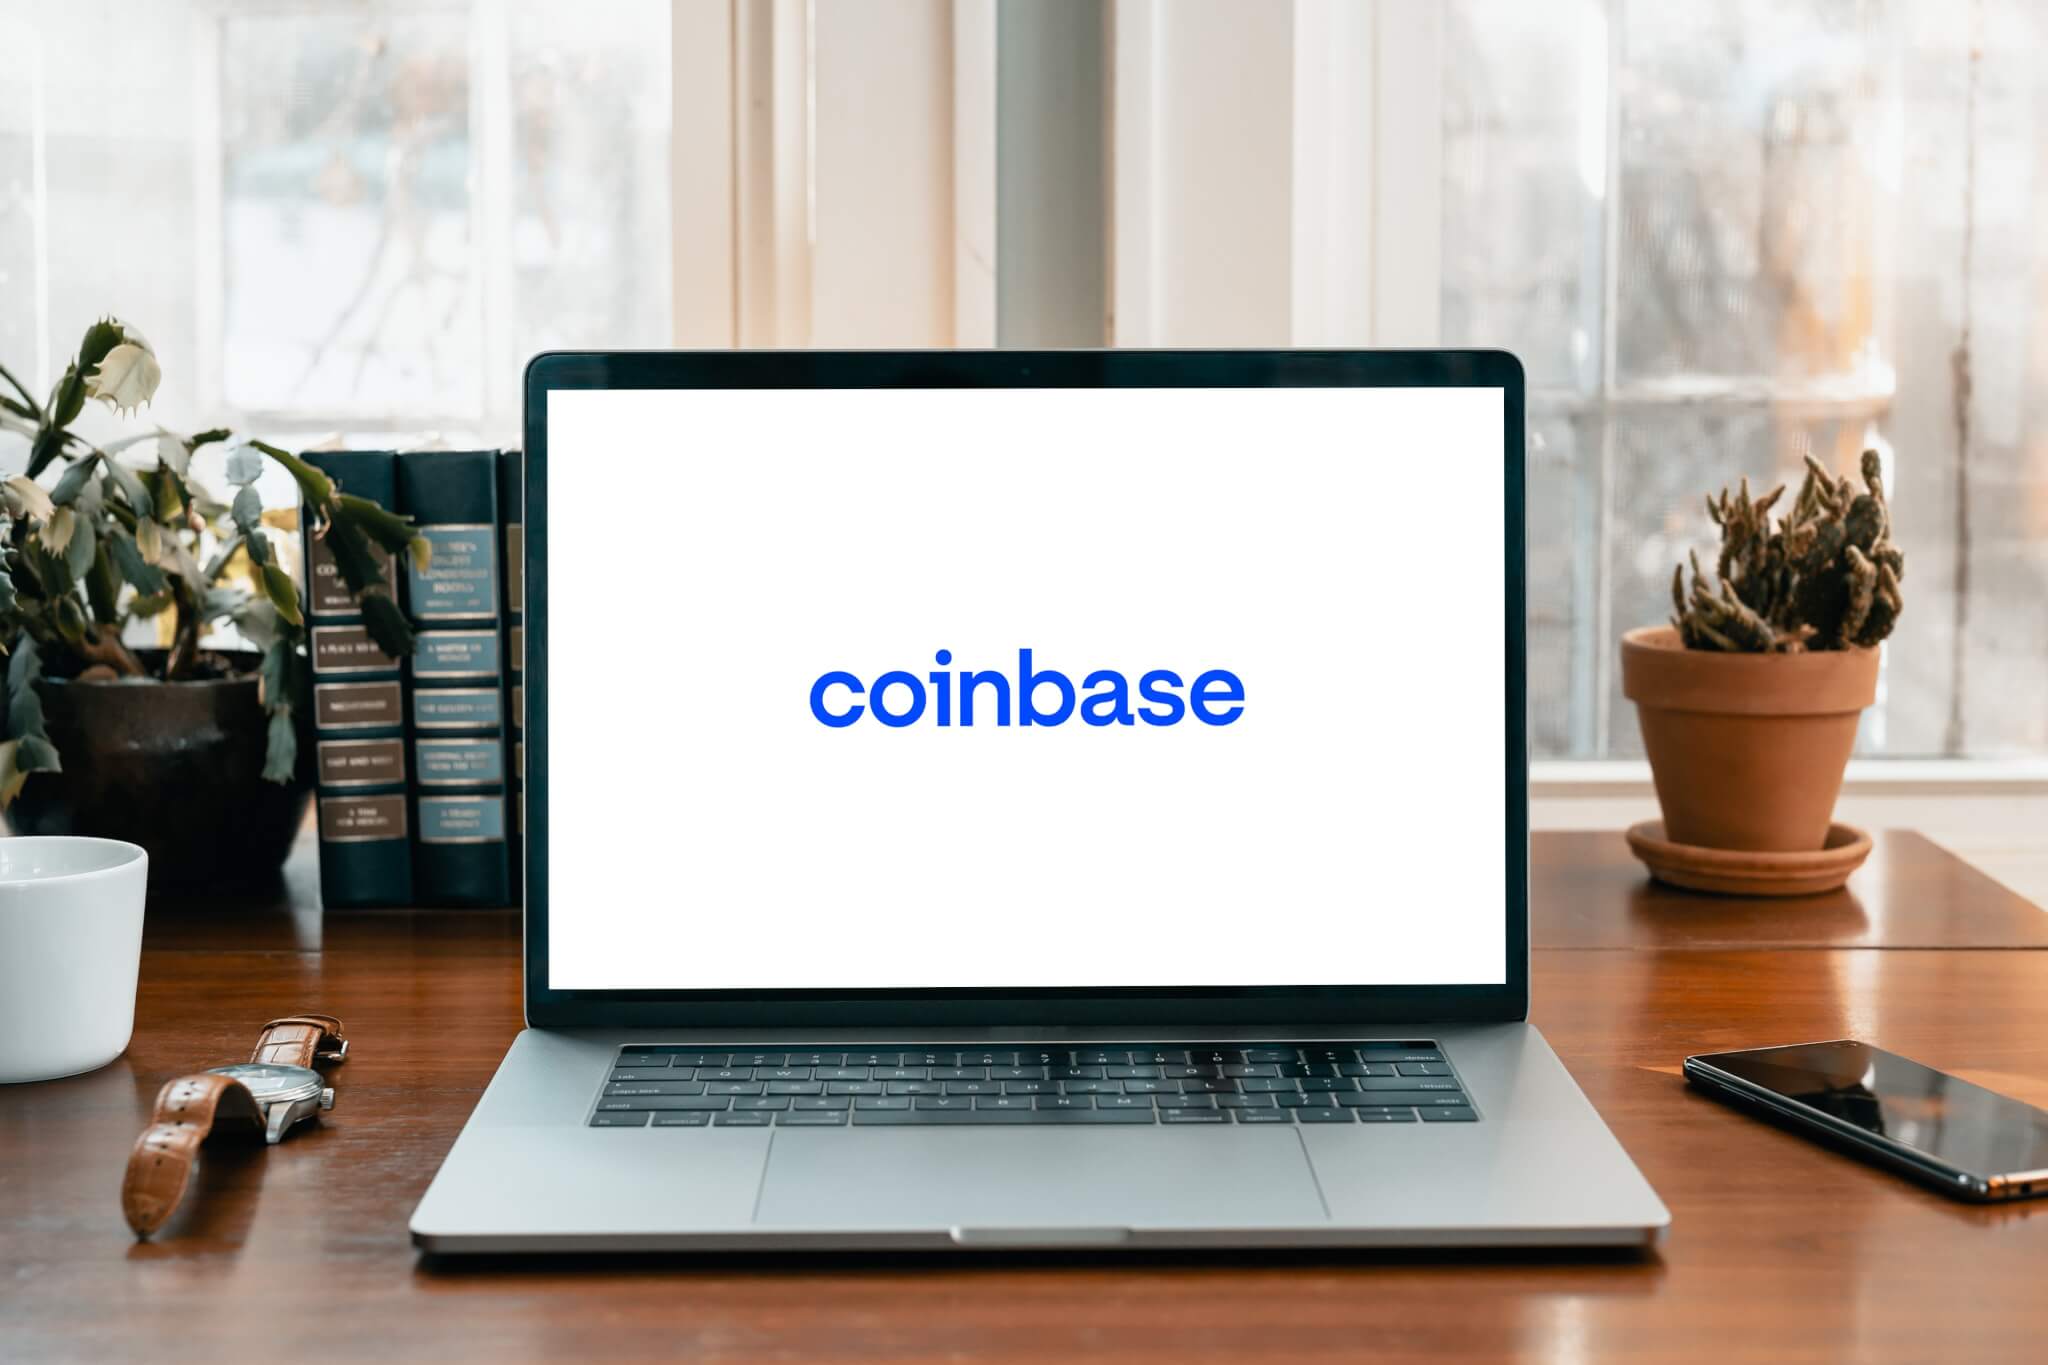 Coinbase now has nearly double the trading volume as Uniswap